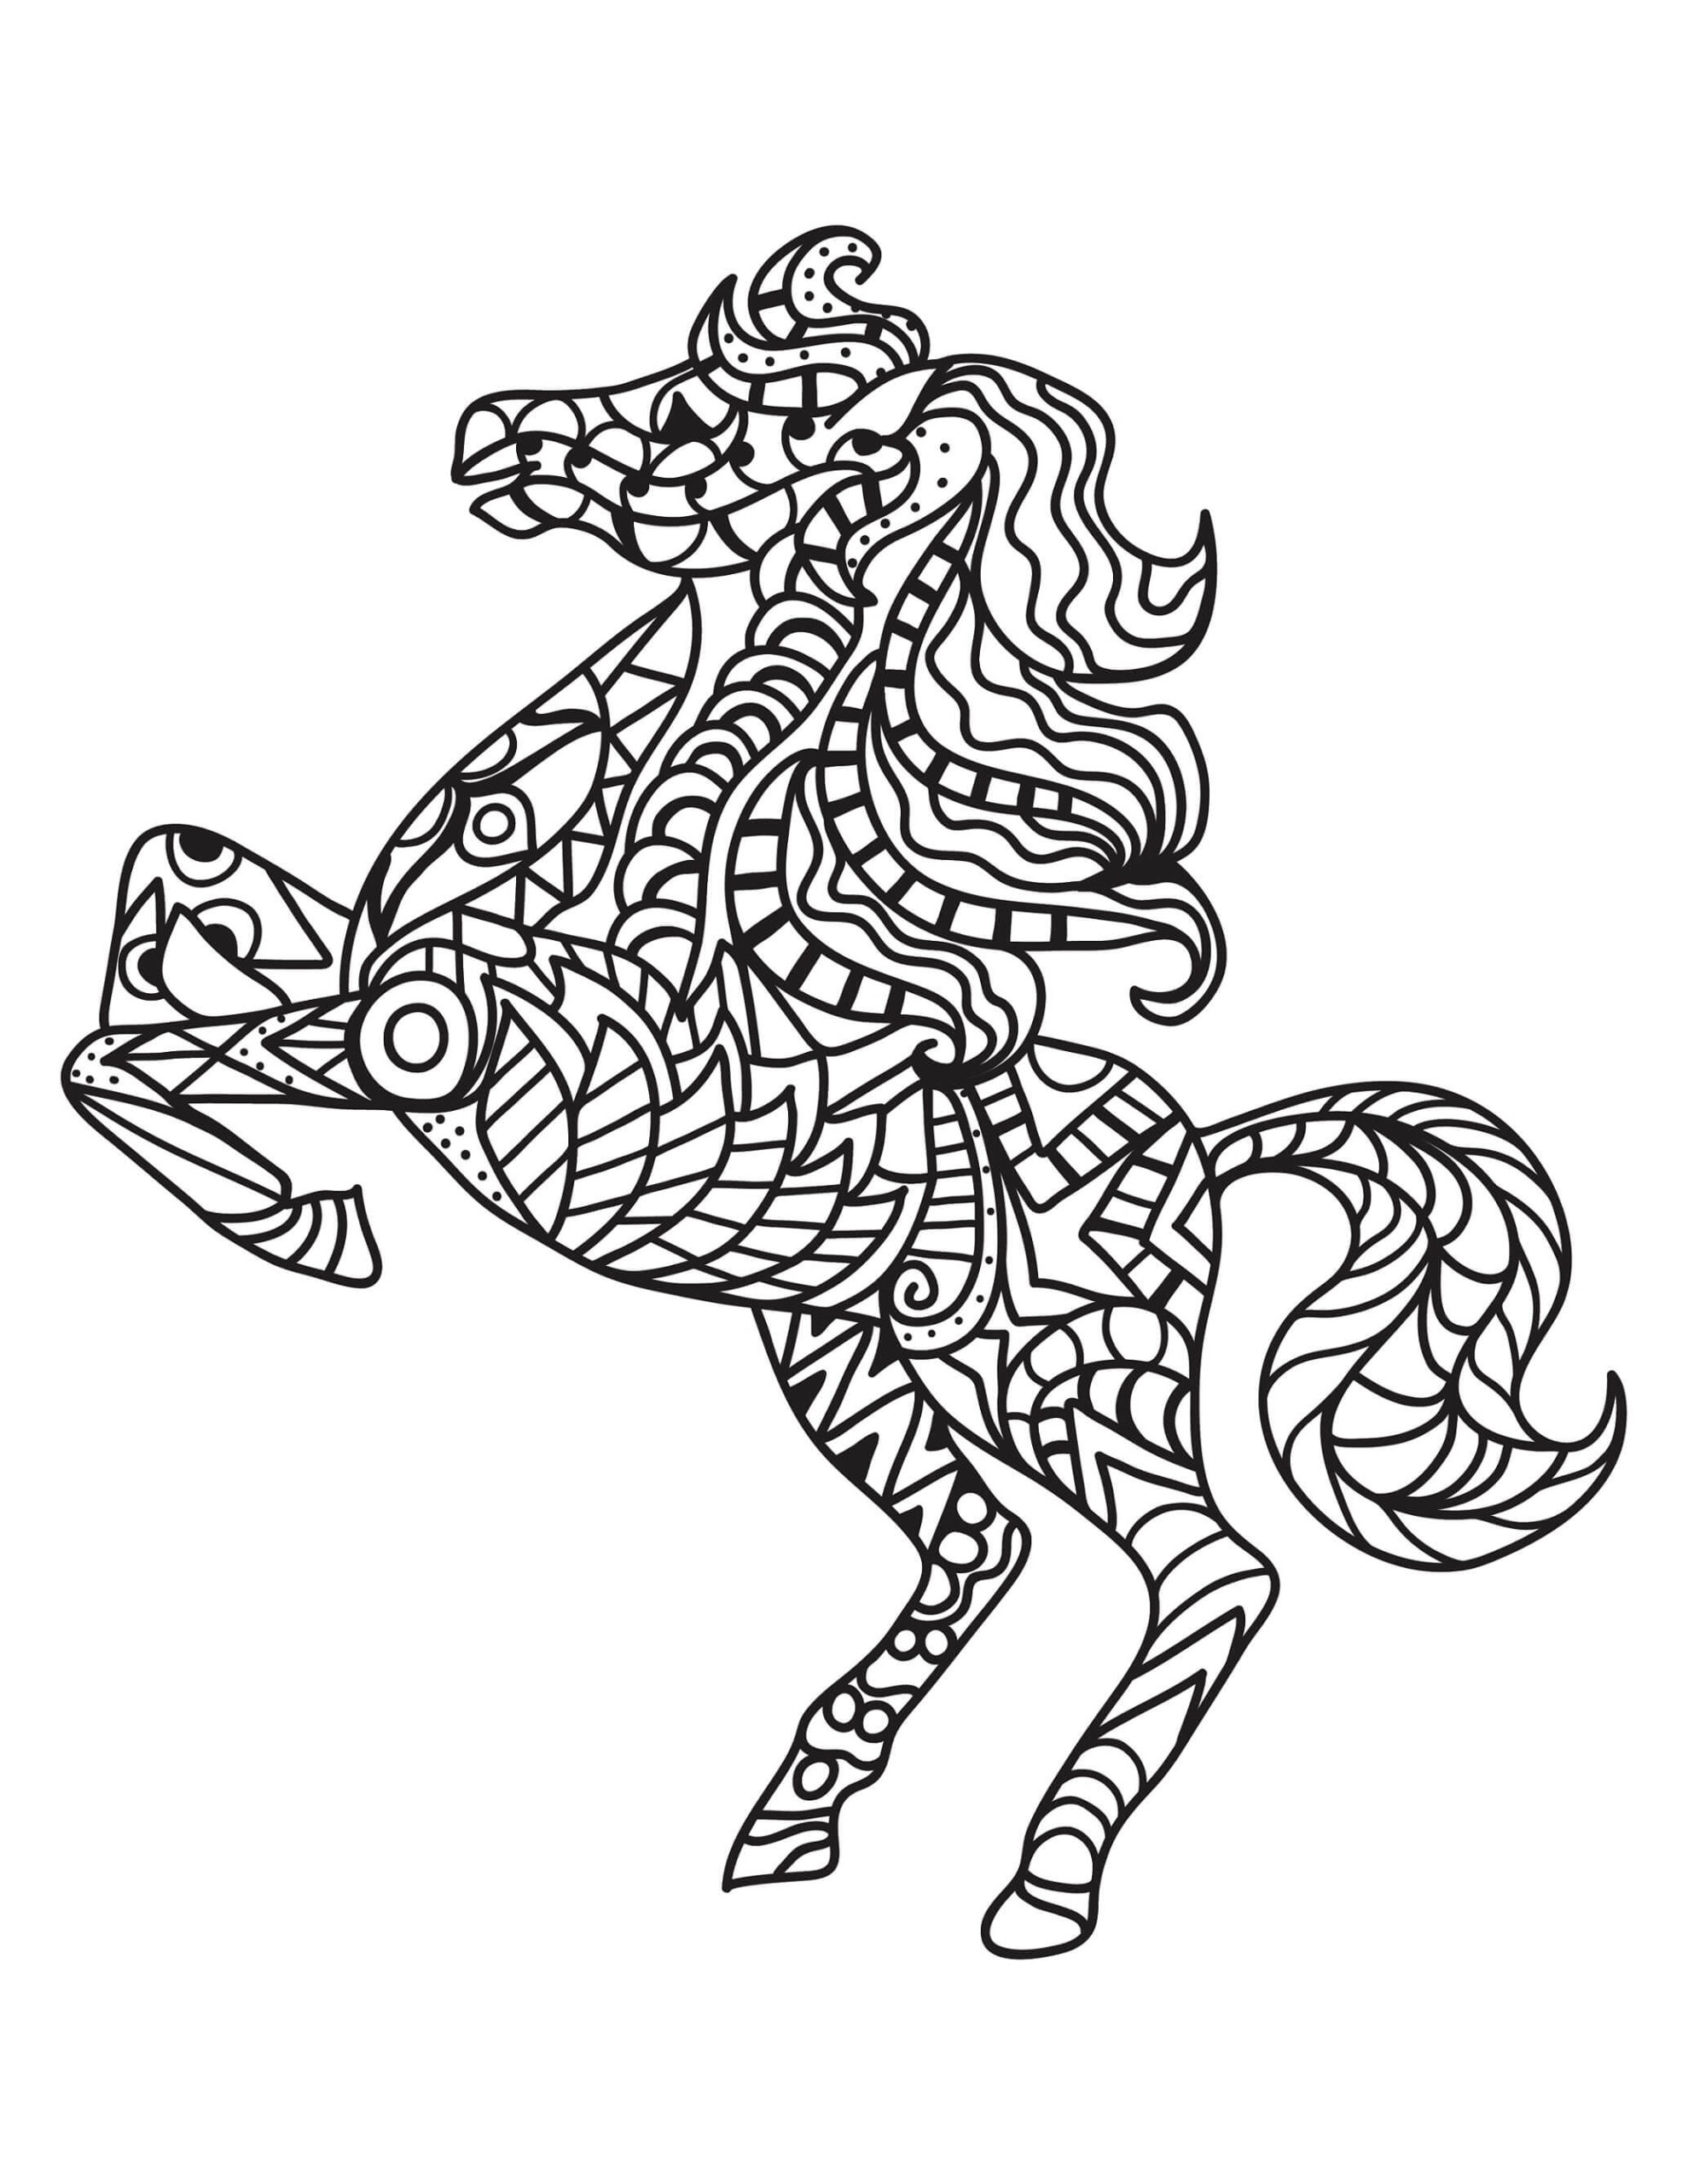 Adorable Horse Mandala coloring page - Download, Print or Color Online ...